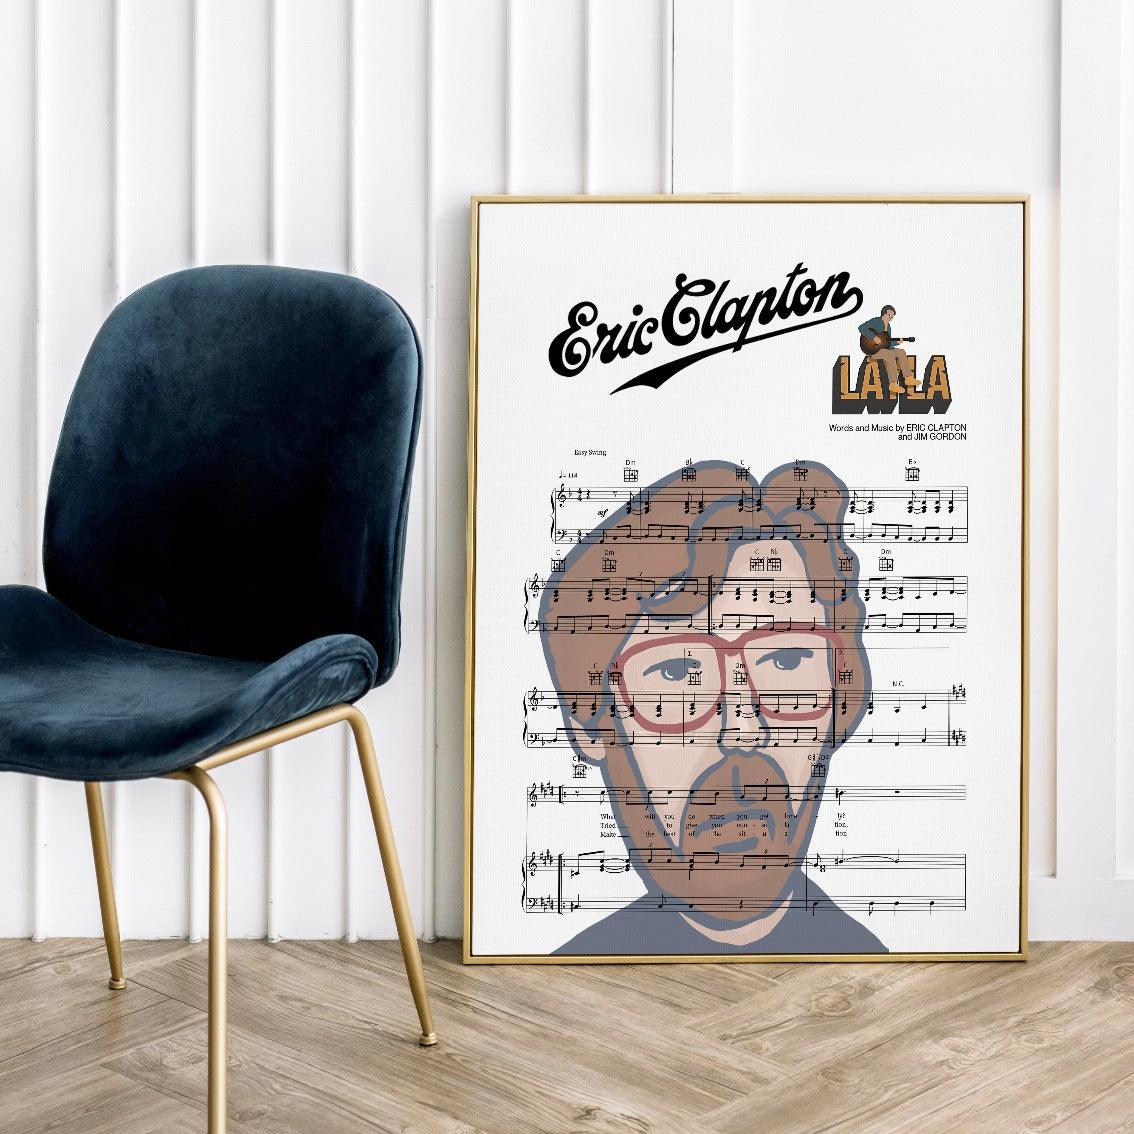 Print lyrical with these unusual and Natural High quality black and white musical scores with brightly coloured illustrations and quirky art print by artist Eric Clapton to put on the wall of the room at home. A4 Posters uk By 98types art online.